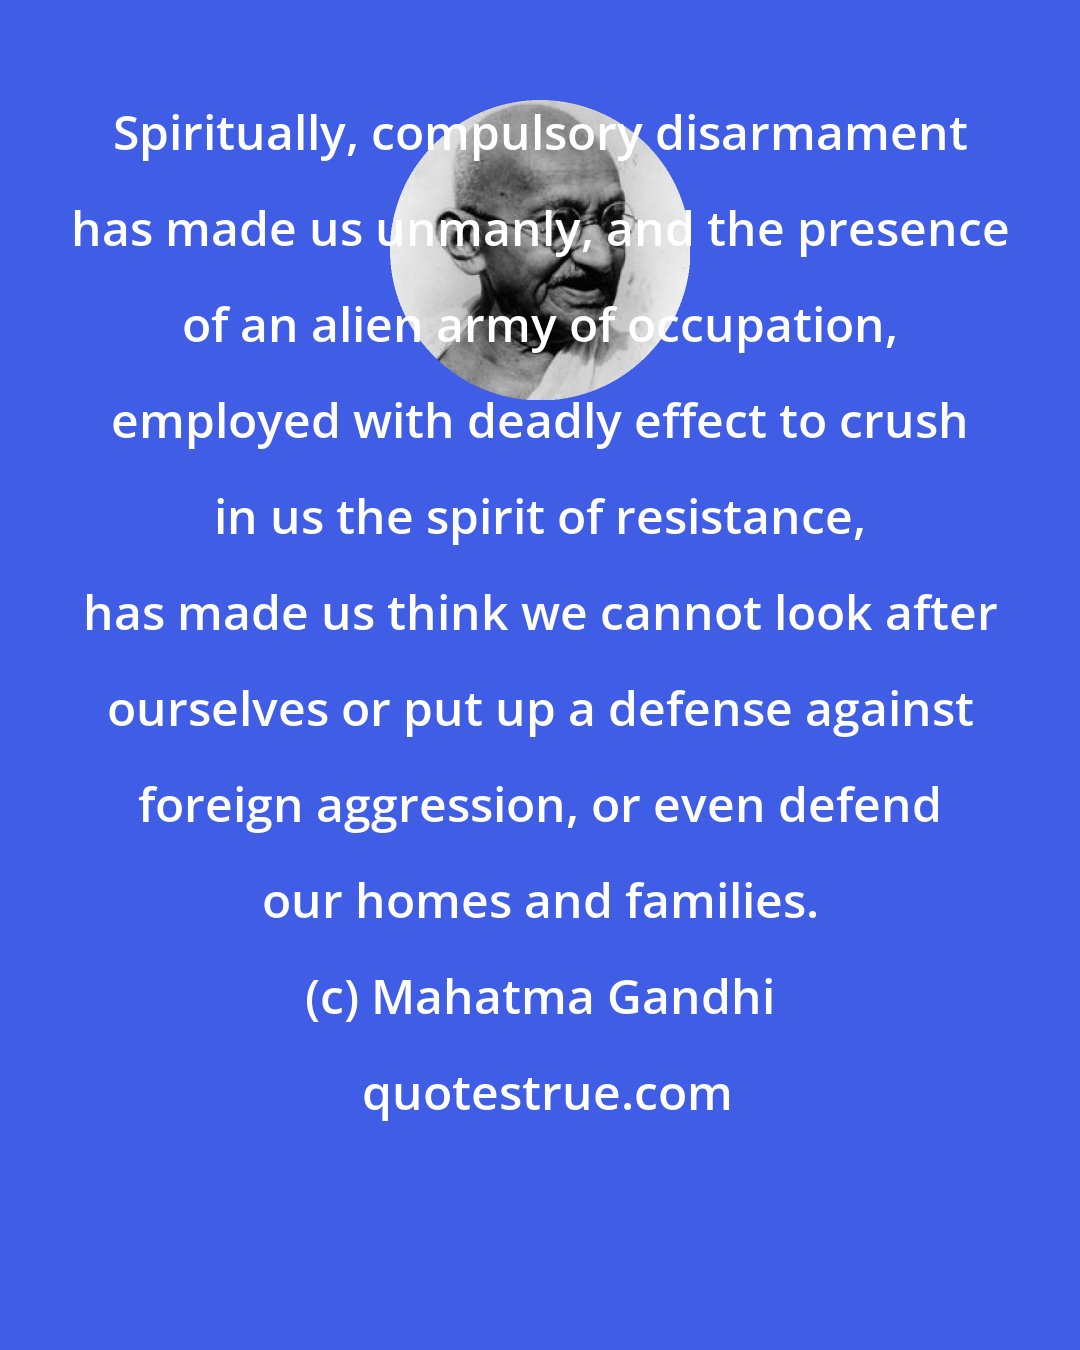 Mahatma Gandhi: Spiritually, compulsory disarmament has made us unmanly, and the presence of an alien army of occupation, employed with deadly effect to crush in us the spirit of resistance, has made us think we cannot look after ourselves or put up a defense against foreign aggression, or even defend our homes and families.